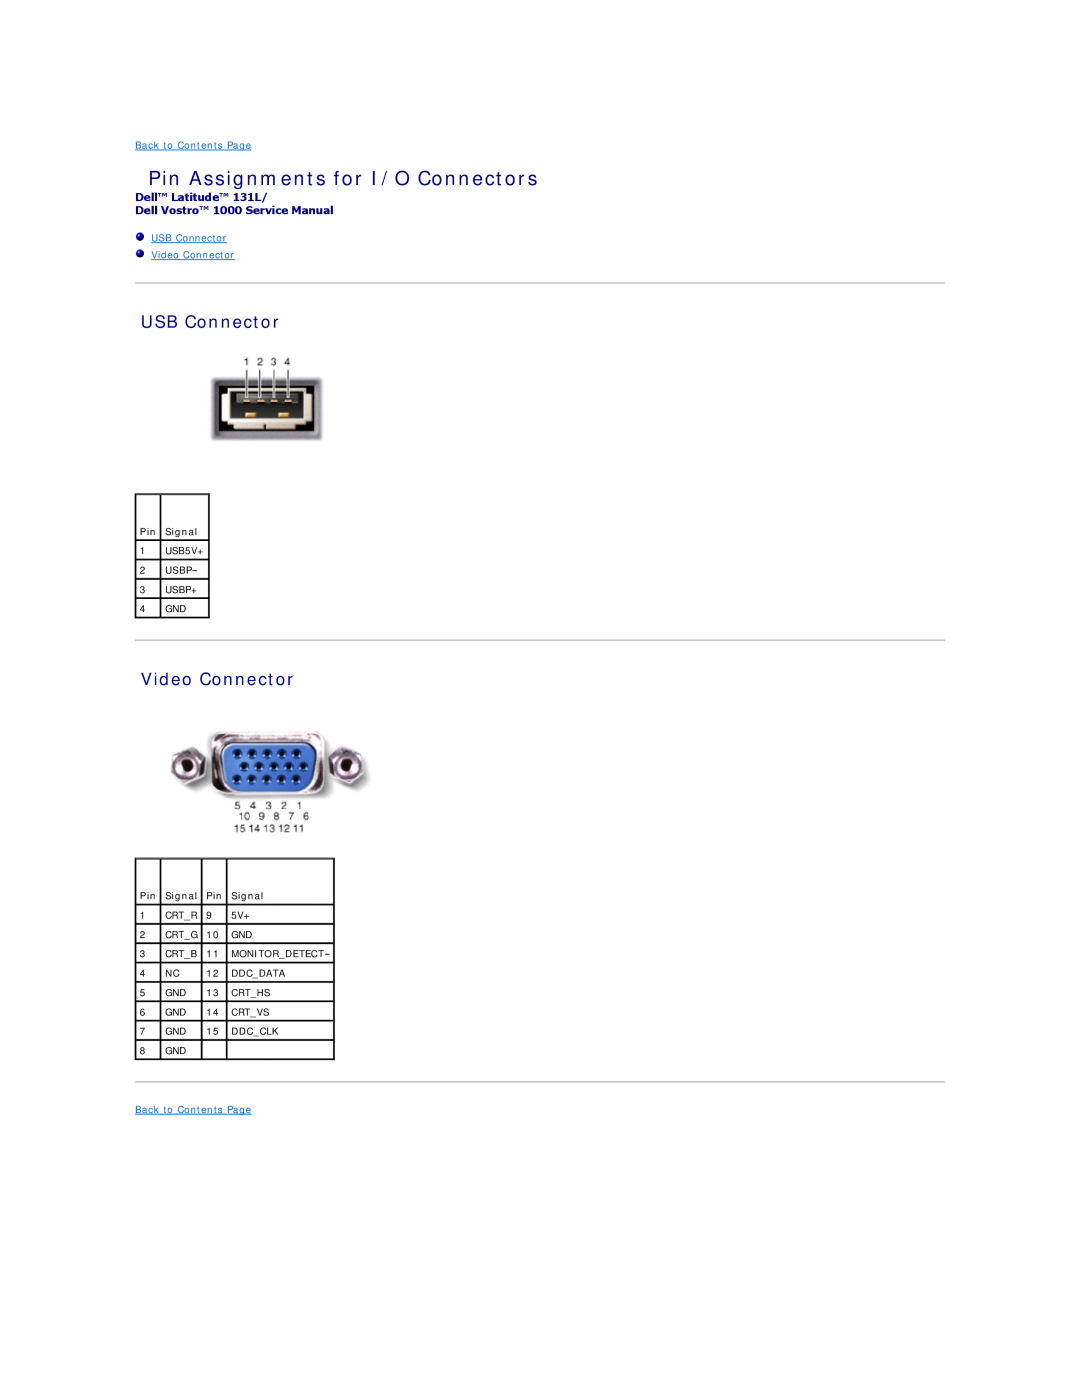 Dell 131L Pin Assignments for I/O Connectors, USB Connector Video Connector, Pin Signal, Back to Contents Page 